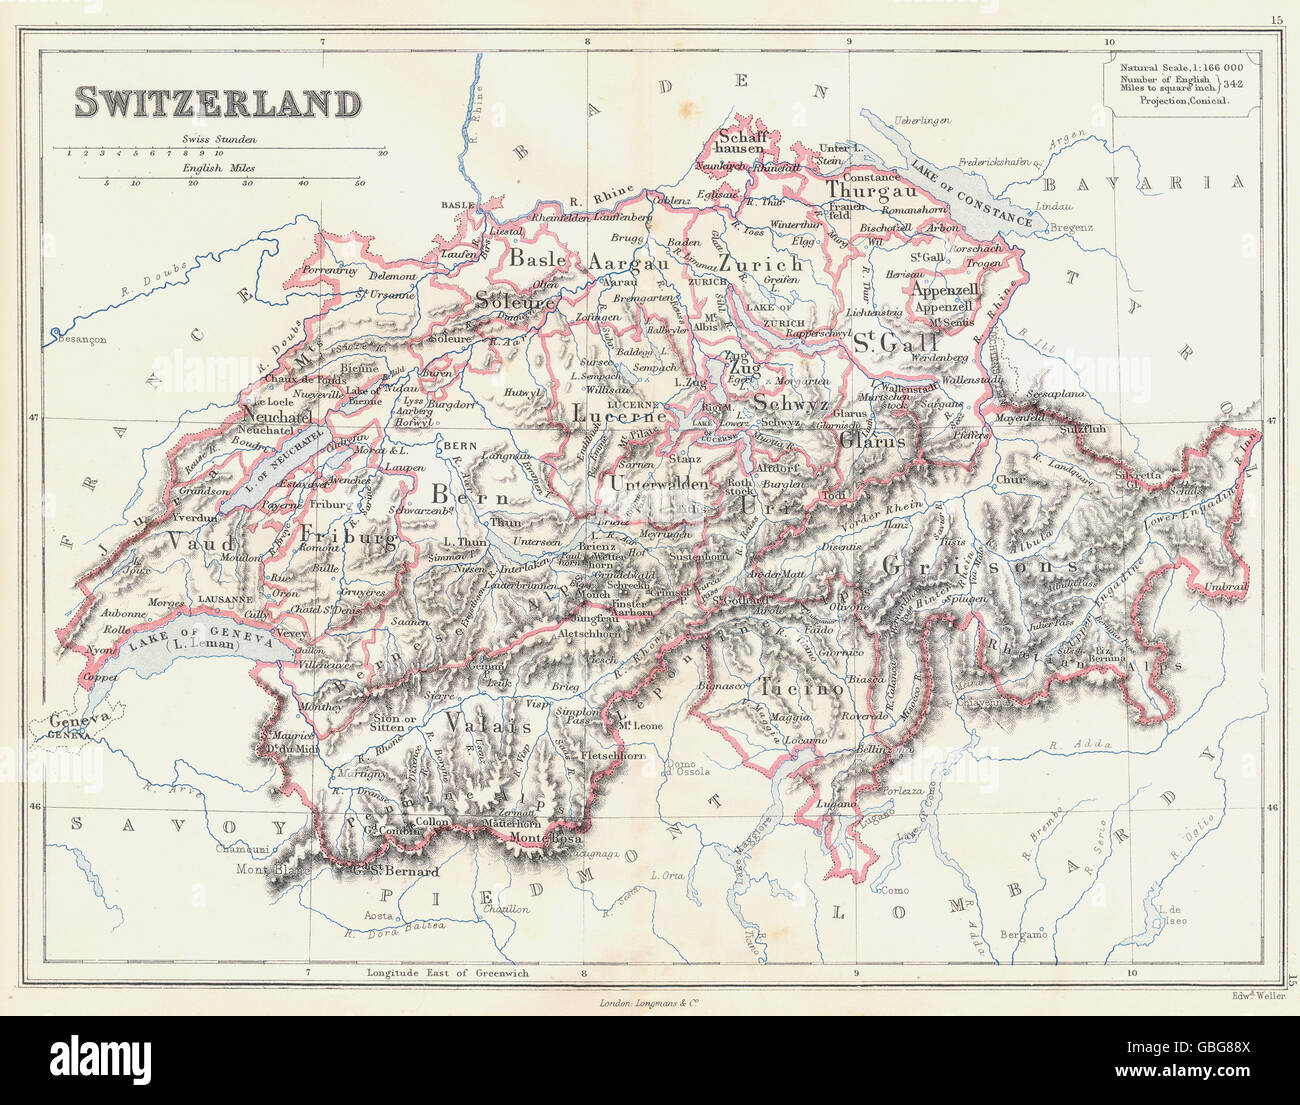 SWITZERLAND: Showing Cantons (shows Geneva as independent!) . BUTLER, 1888 map Stock Photo